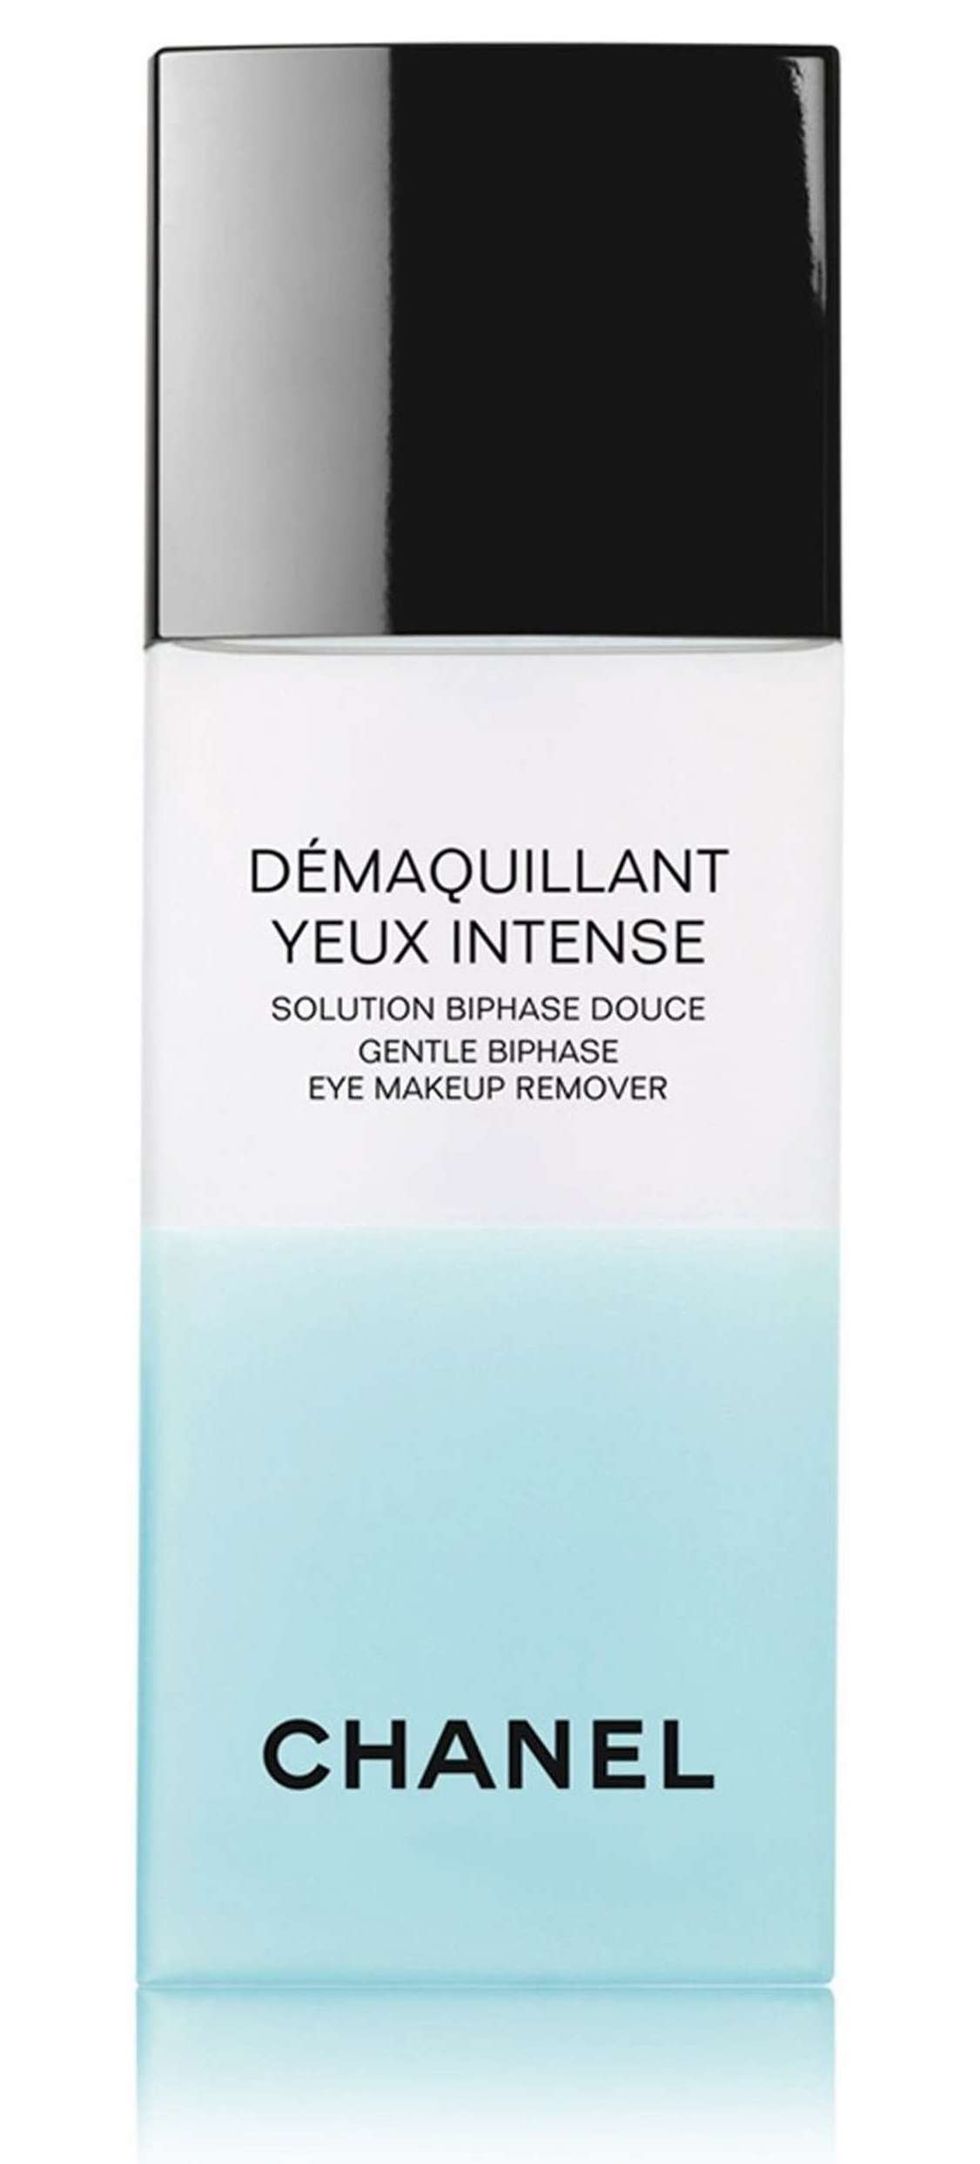 The Best Makeup Removers - New Drugstore and Luxury Makeup Removers